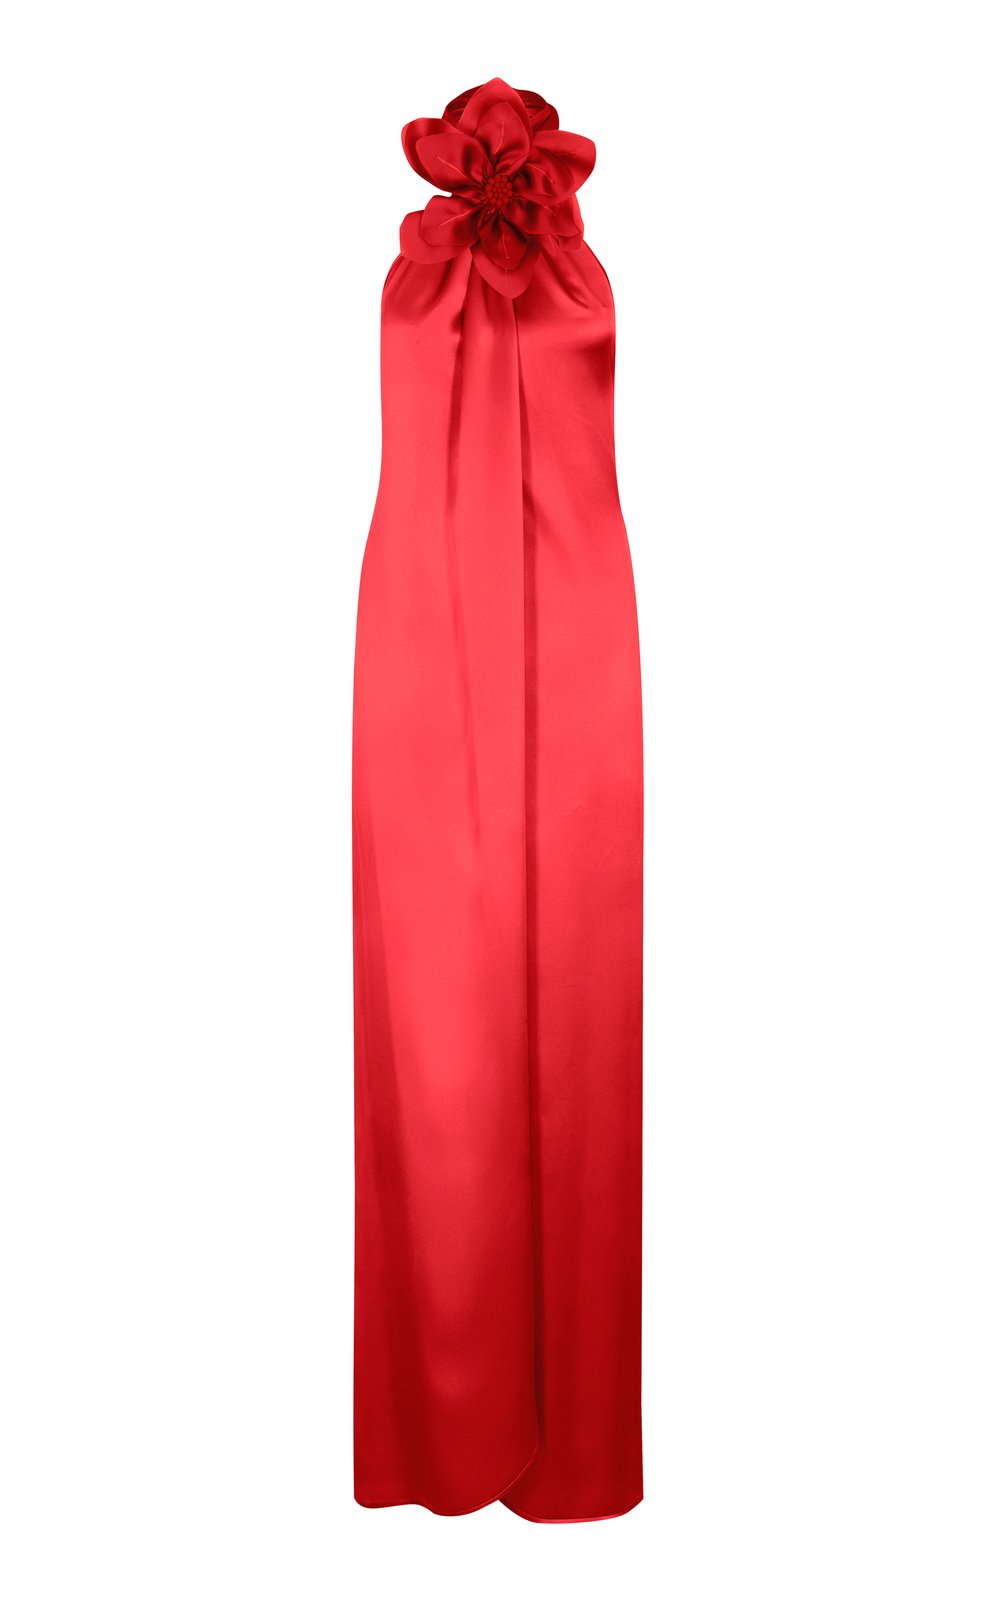 andres-otalora-coral-magdalena-floral-appliqued-silk-gown.jpg